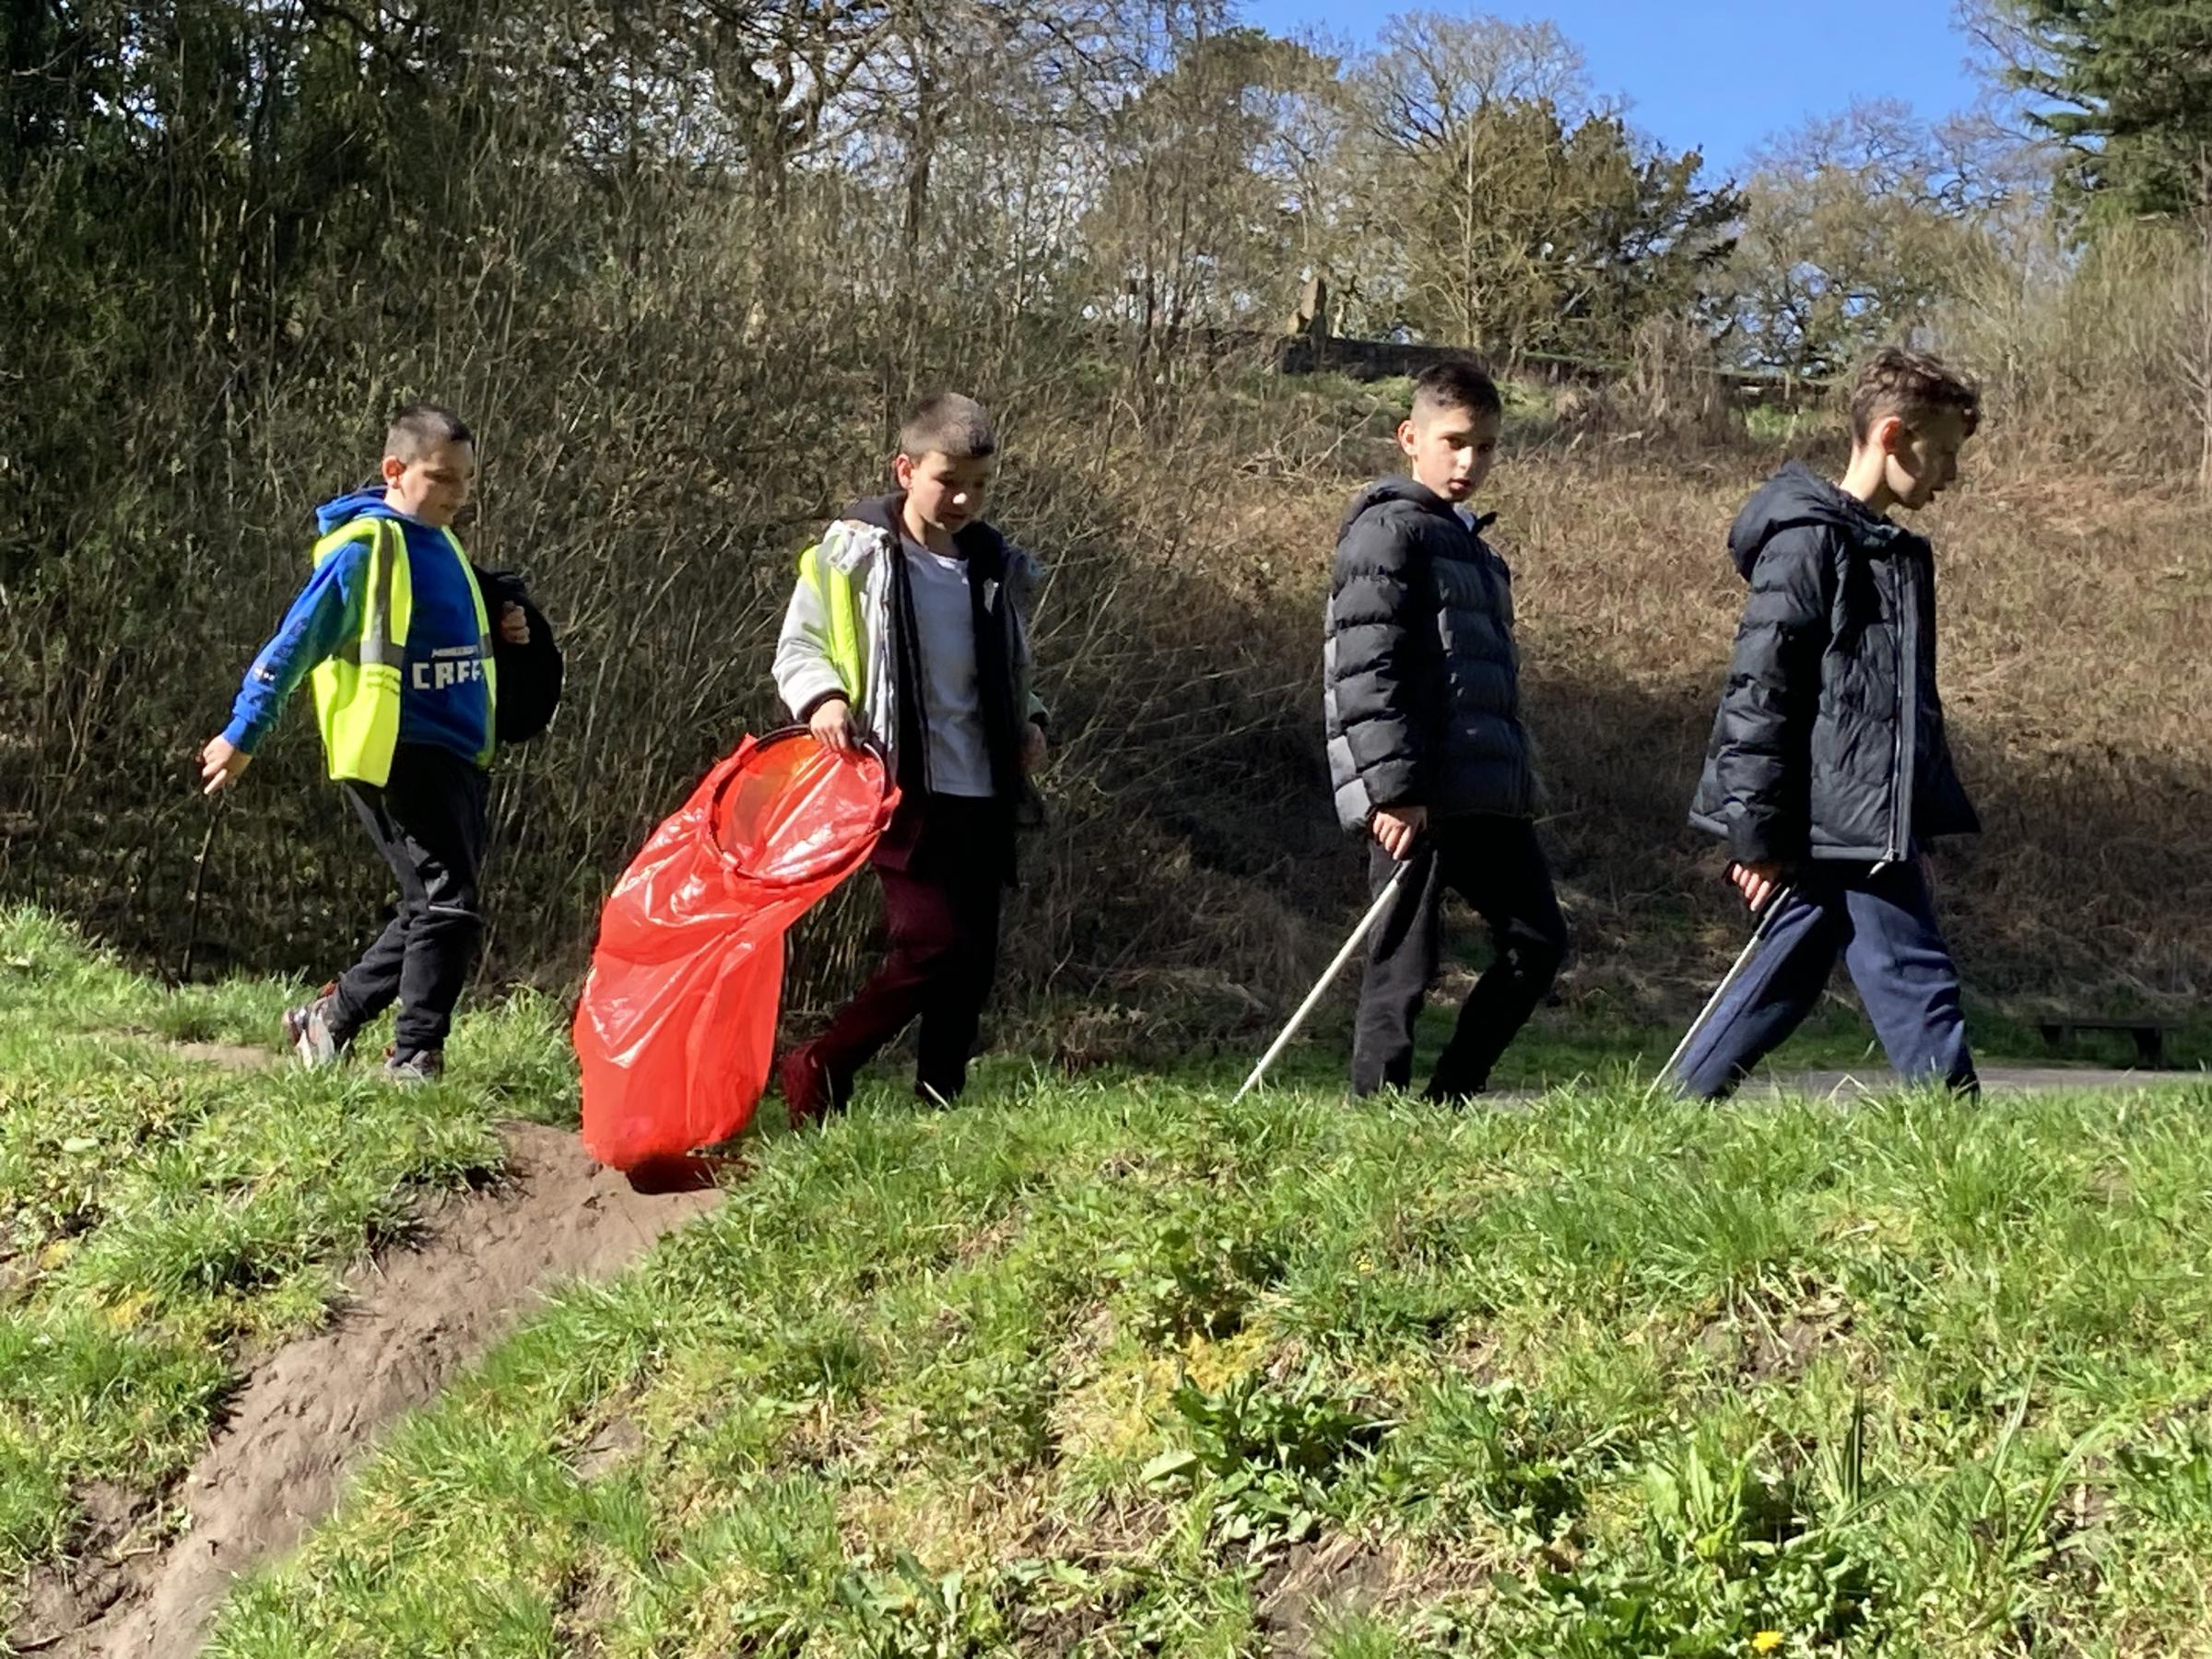 Litterpick in the community for pupils at Ysgol Ty Ffynnon.